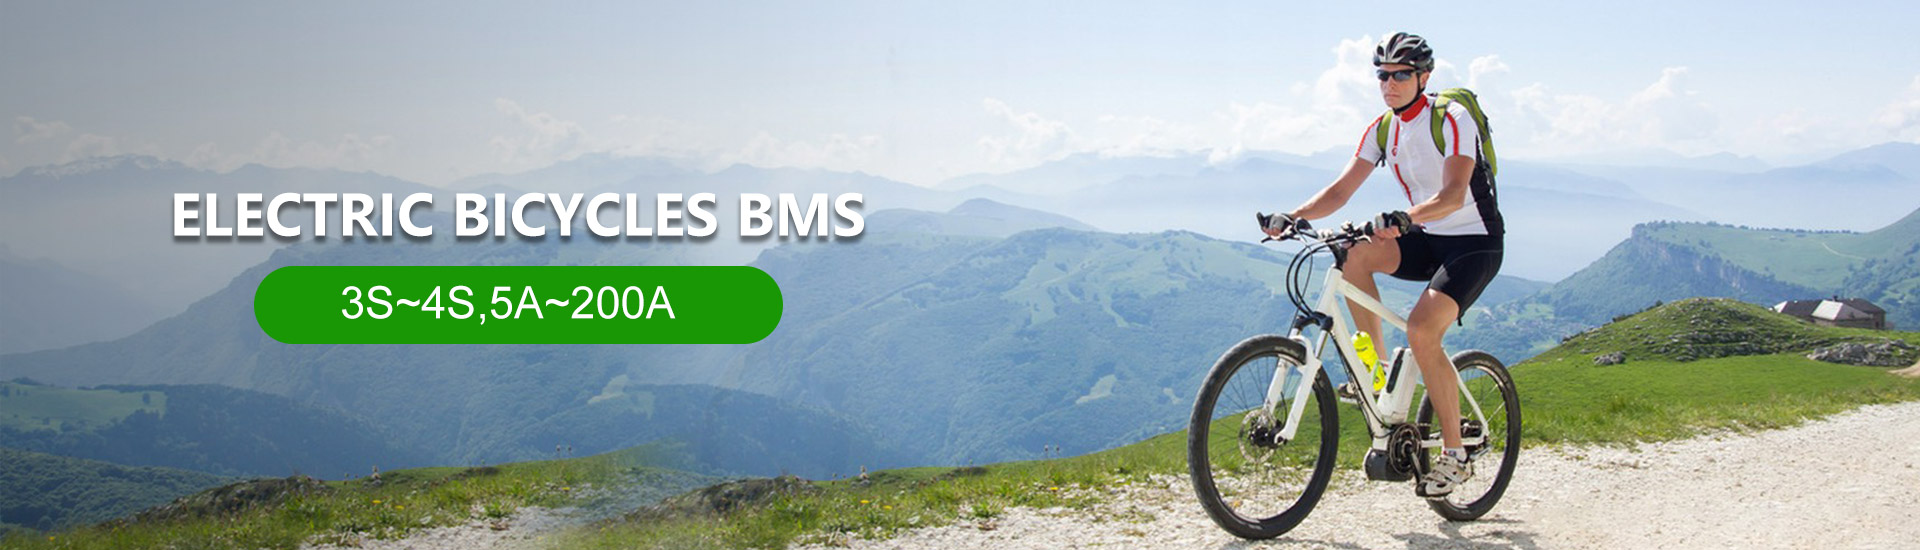 Electric Bicycles BMS